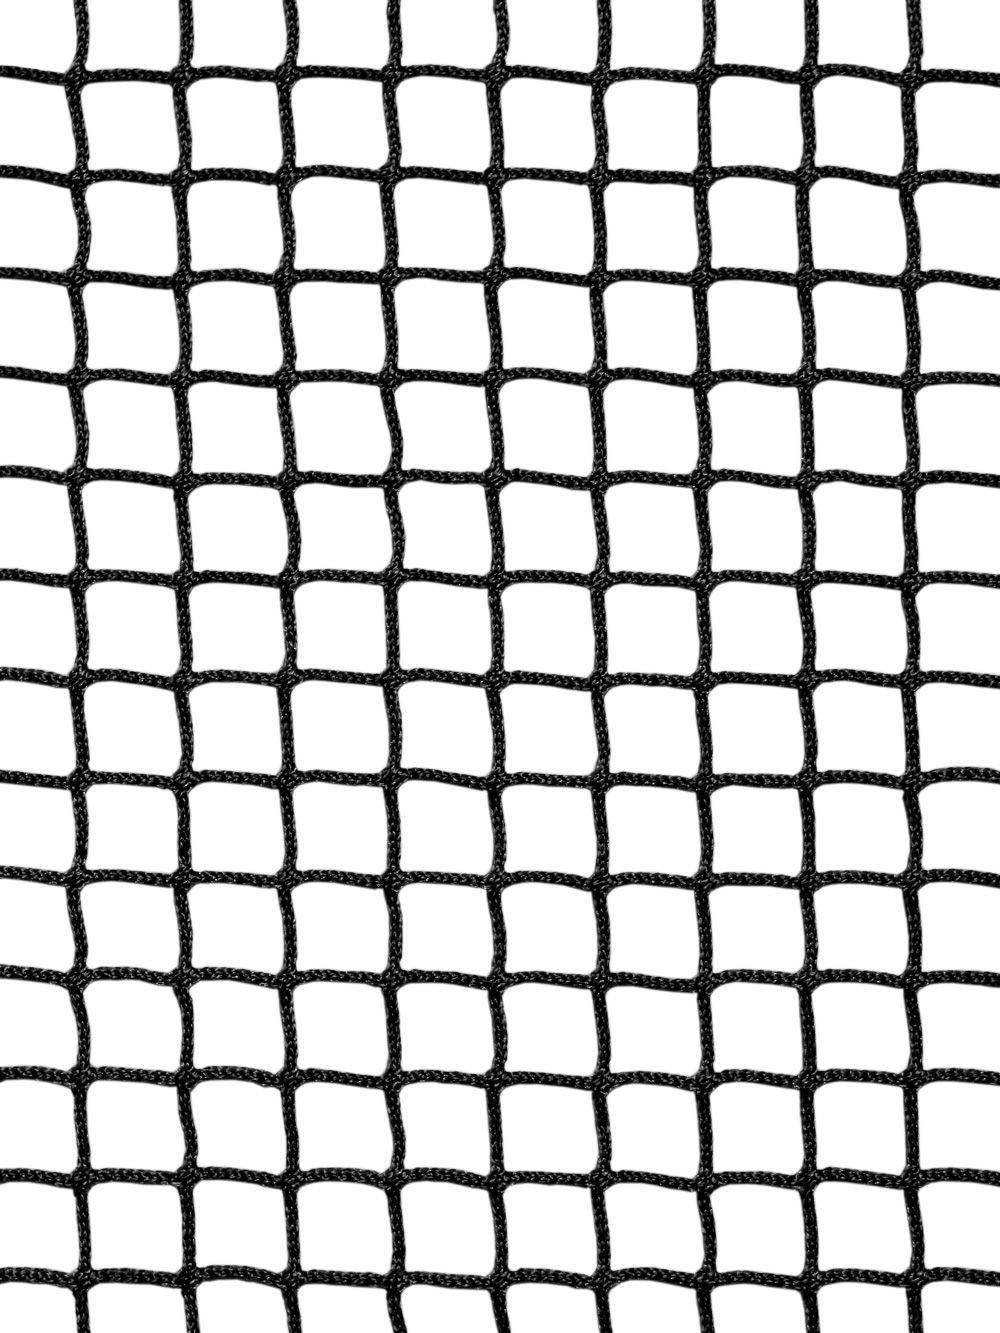 Product N371BK | InCord Knotless 3/4 inch Black Custom Safety Netting image